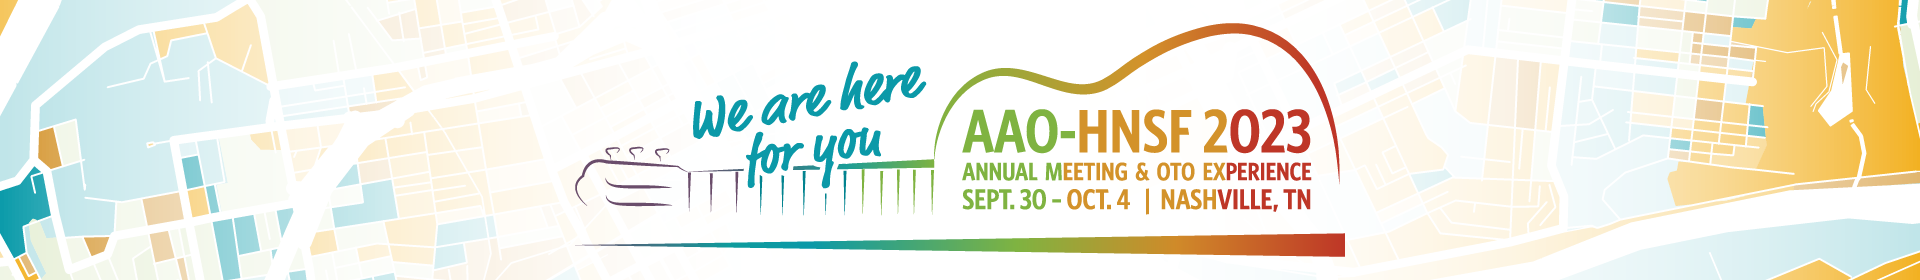 AAO-HNSF 2023 Annual Meeting & OTO Experience Event Banner